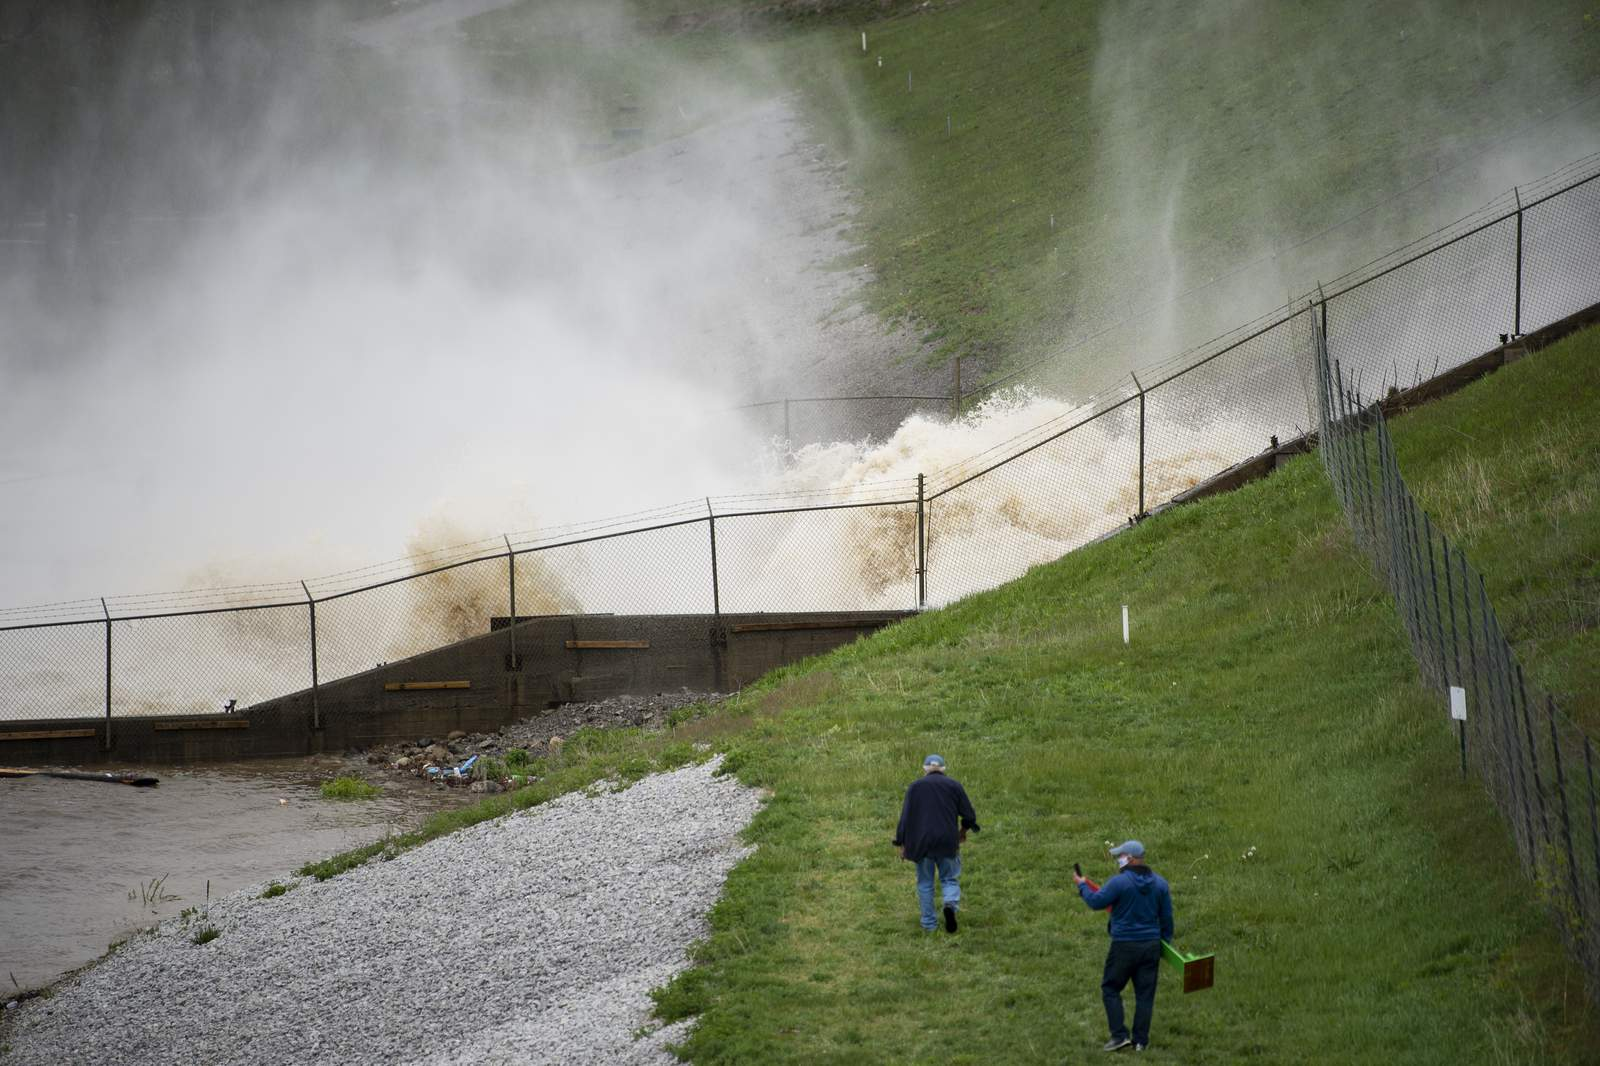 Edenville Dam breaks in Michigan, US seems to face consecutive disasters amid worst coronavirus pandemic